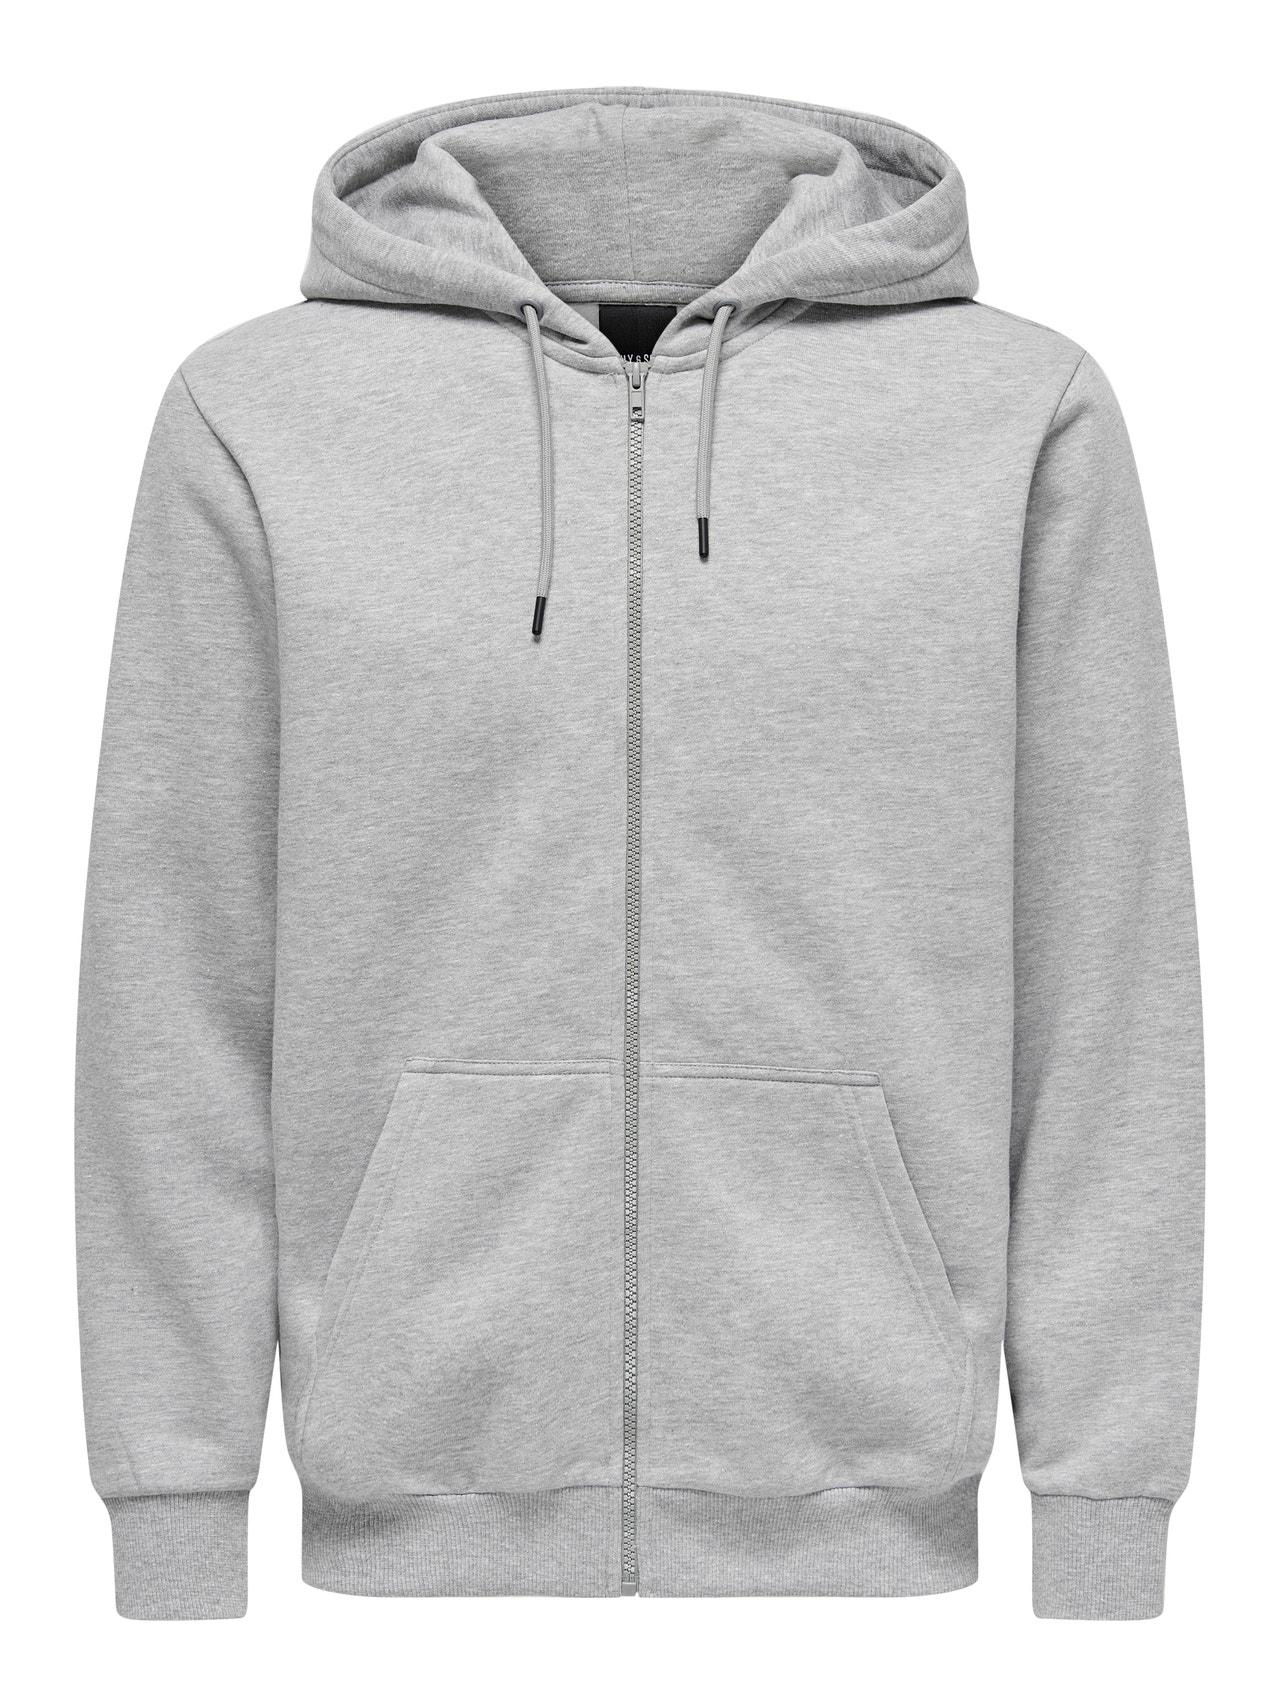 https://images.onlyandsons.com/22018684/3500987/001/onlysons-basichoodie-grey.jpg?v=9754befb3a1c6885f2ab4b7699d69b81&format=webp&width=1280&quality=90&key=25-0-3